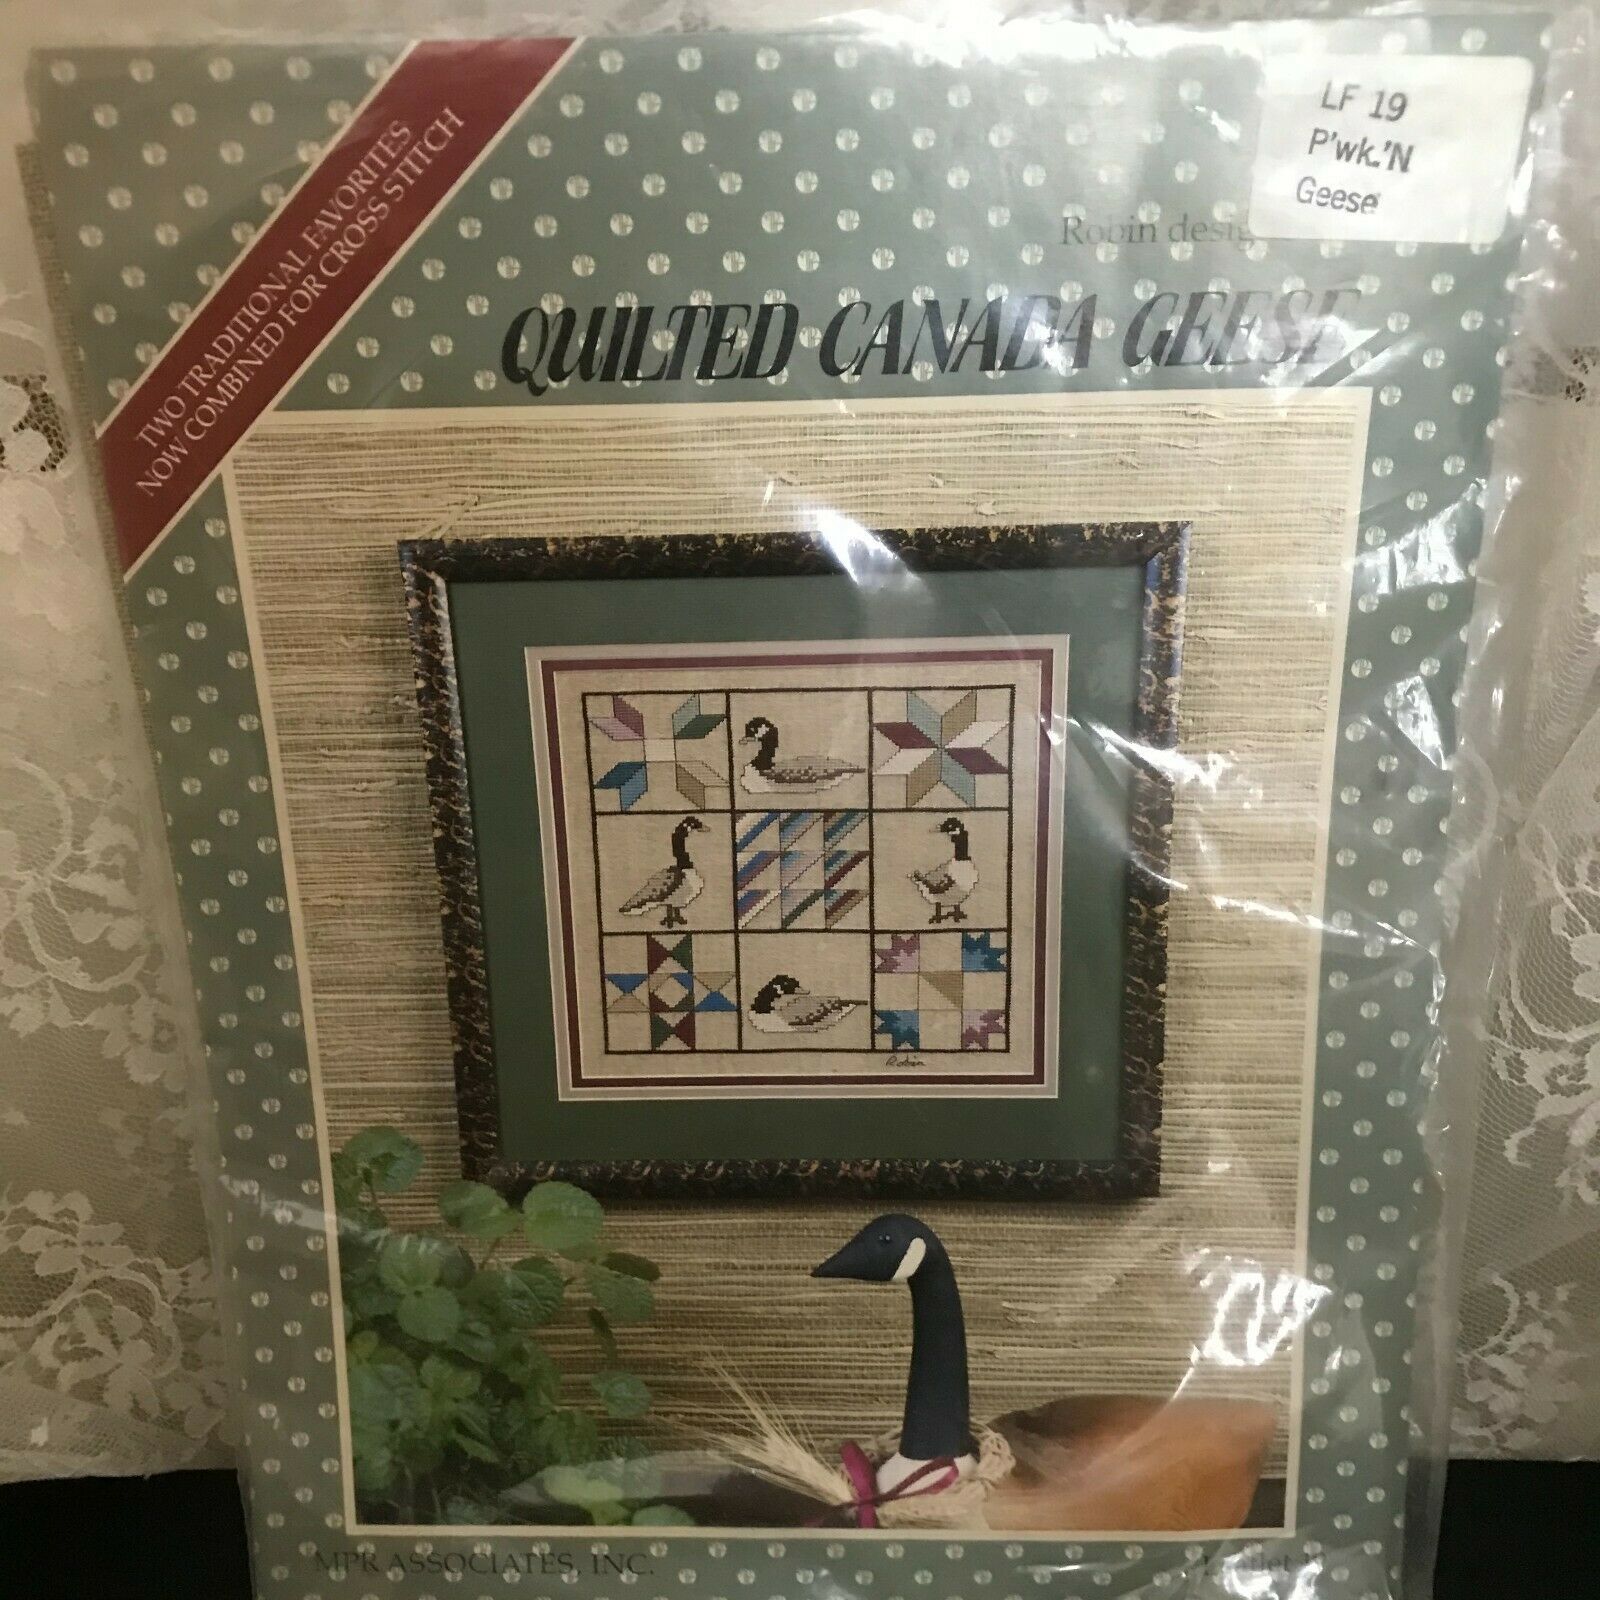 MPR Associates Quilted Canada Geese Cross Stitch Kit #19  26 Count Linen - $14.12